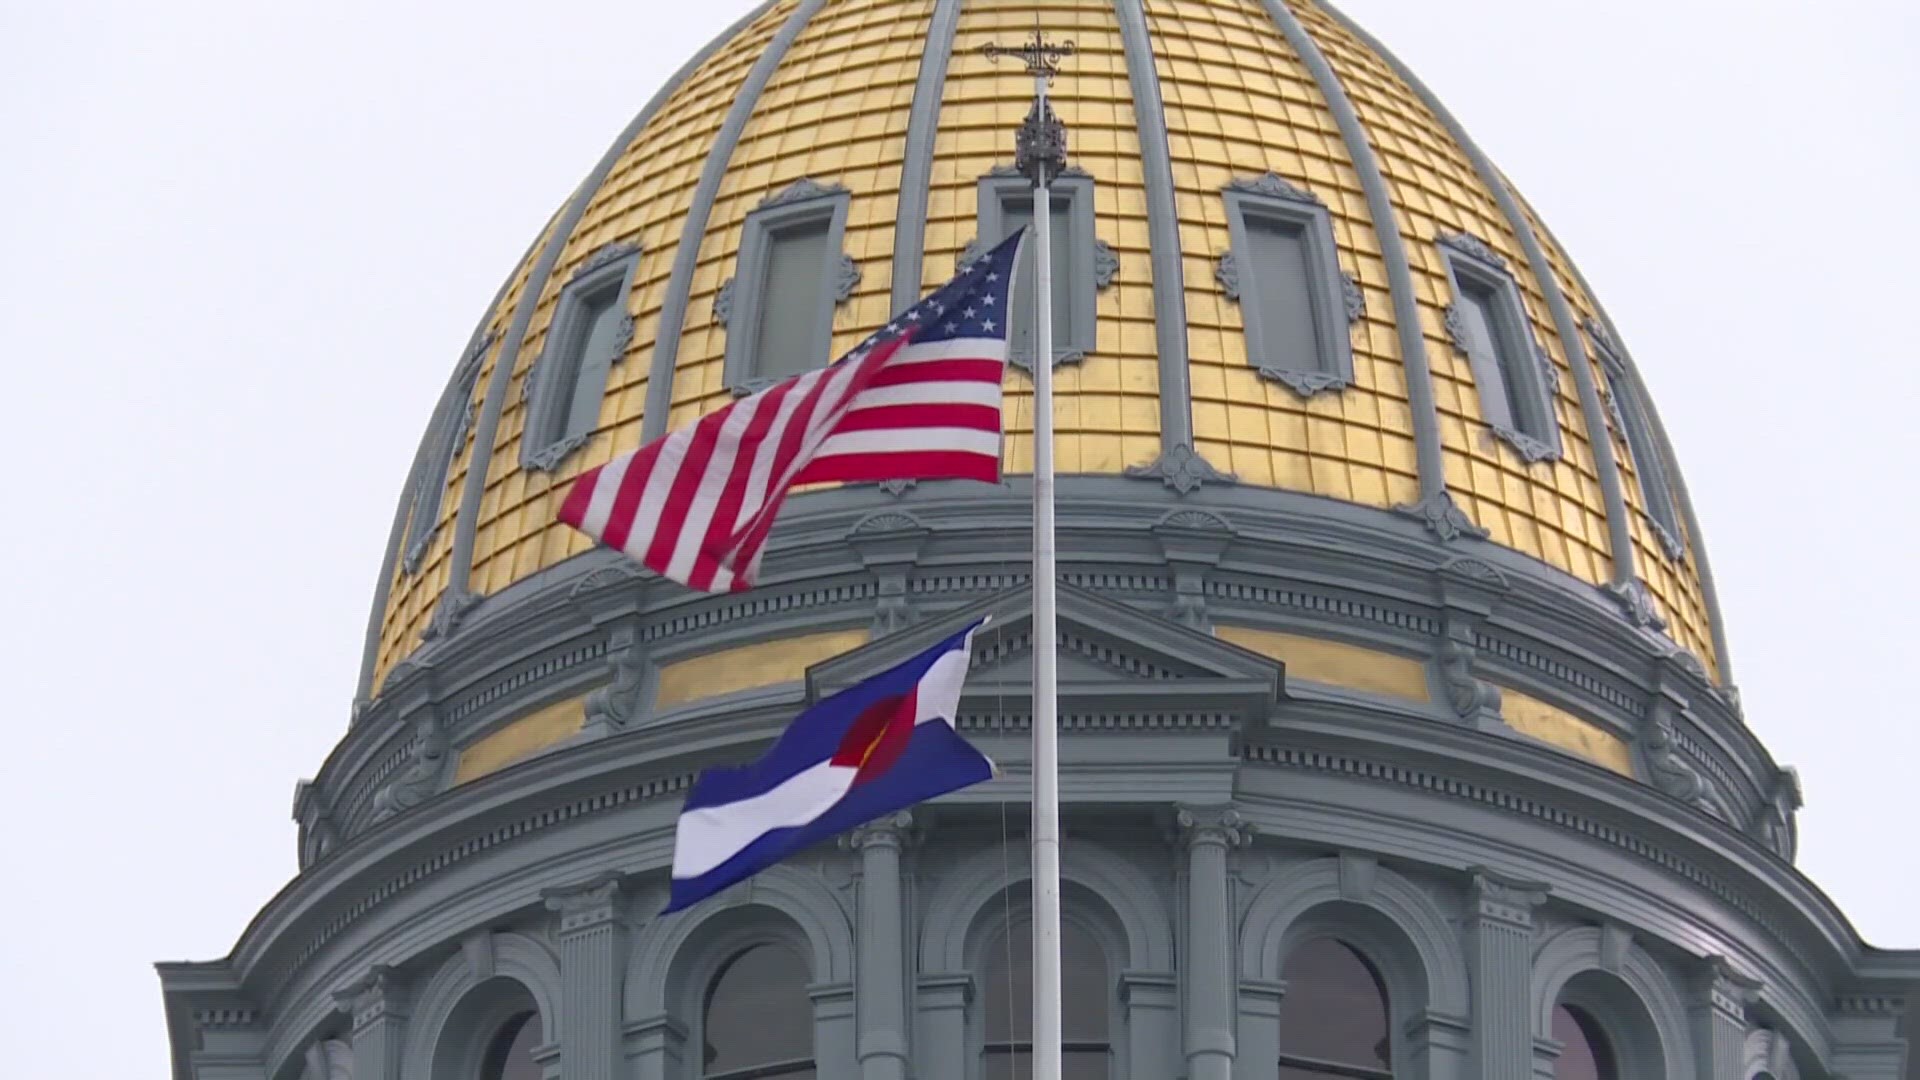 A new round of laws are taking effect in July in Colorado after 11 bills were passed by the state legislature during the latest session.